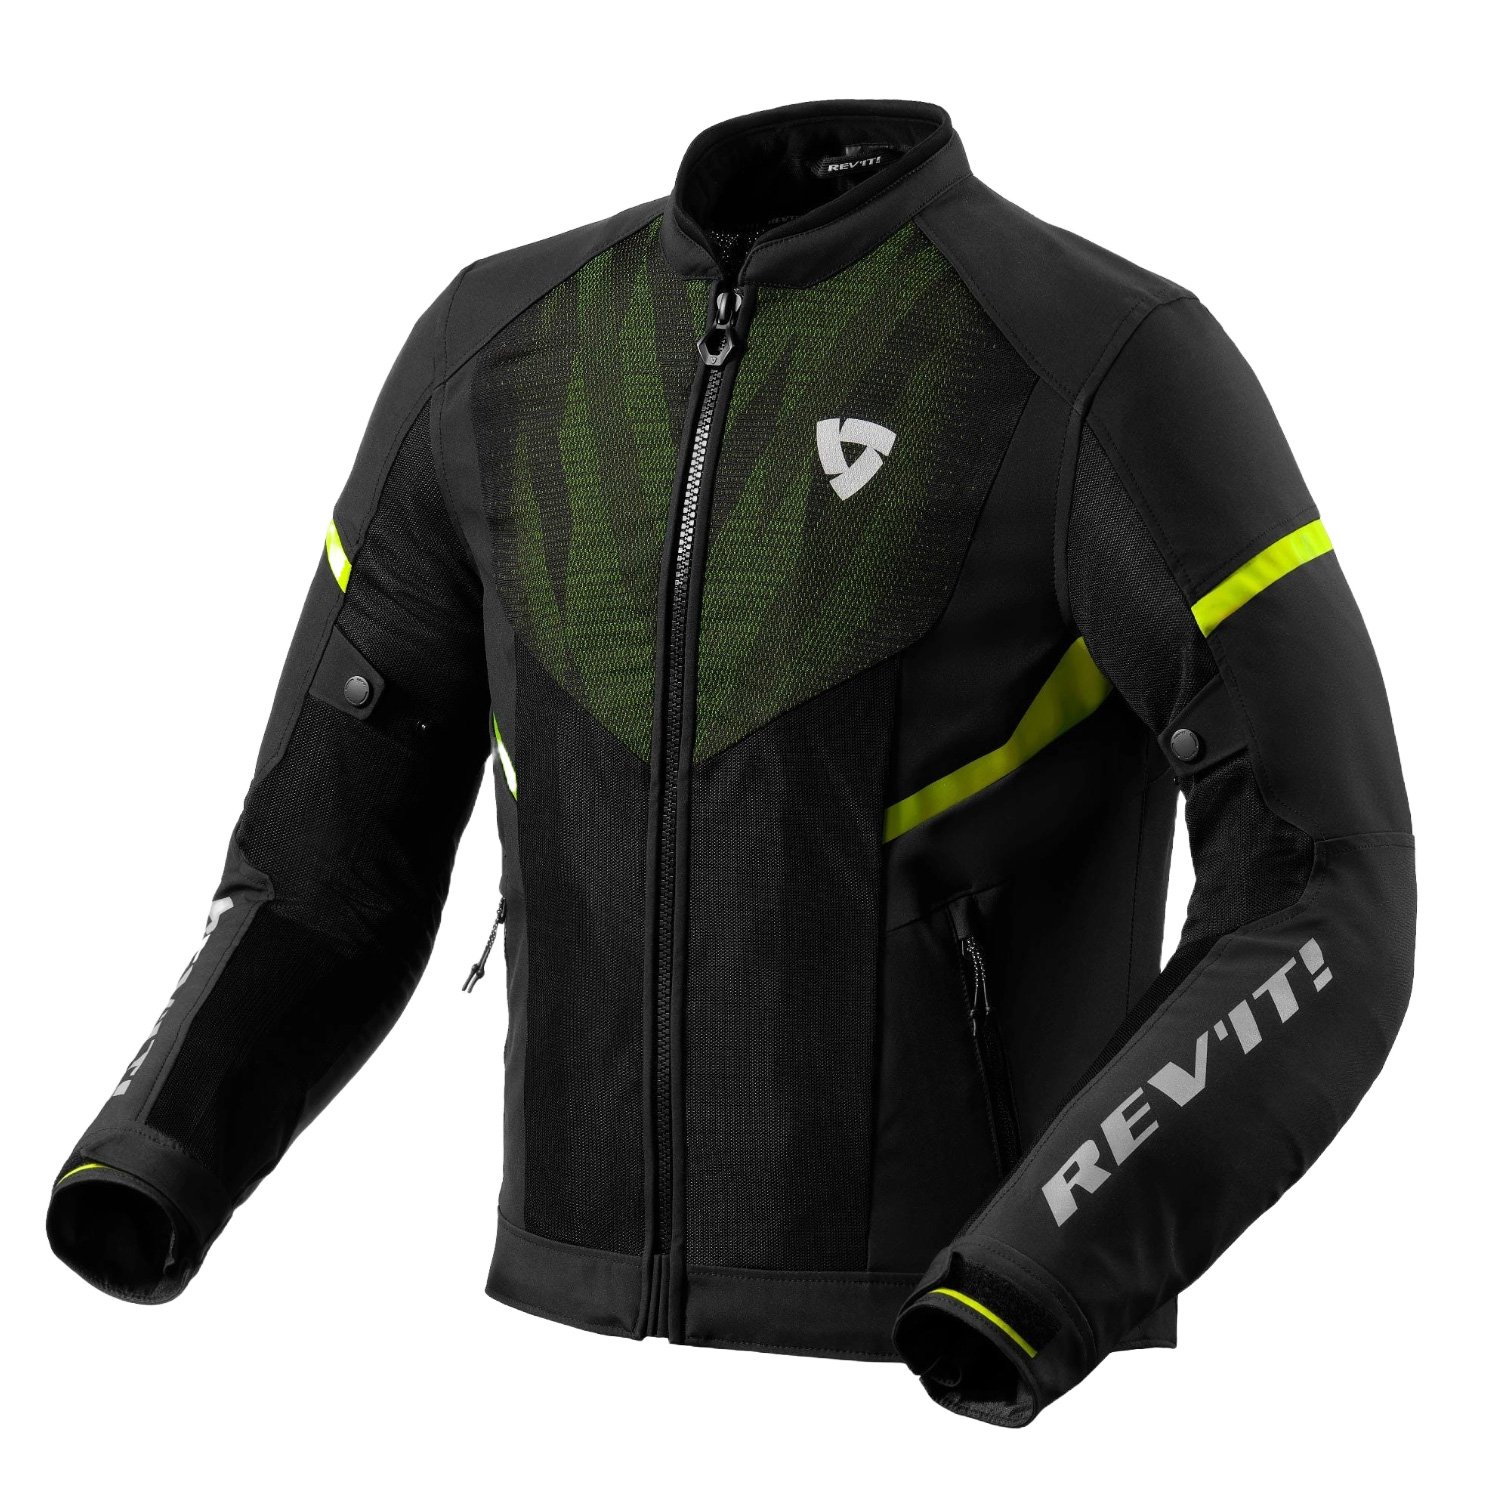 Image of REV'IT! Hyperspeed 2 GT Air Jacket Black Neon Yellow Size 3XL ID 8700001367639